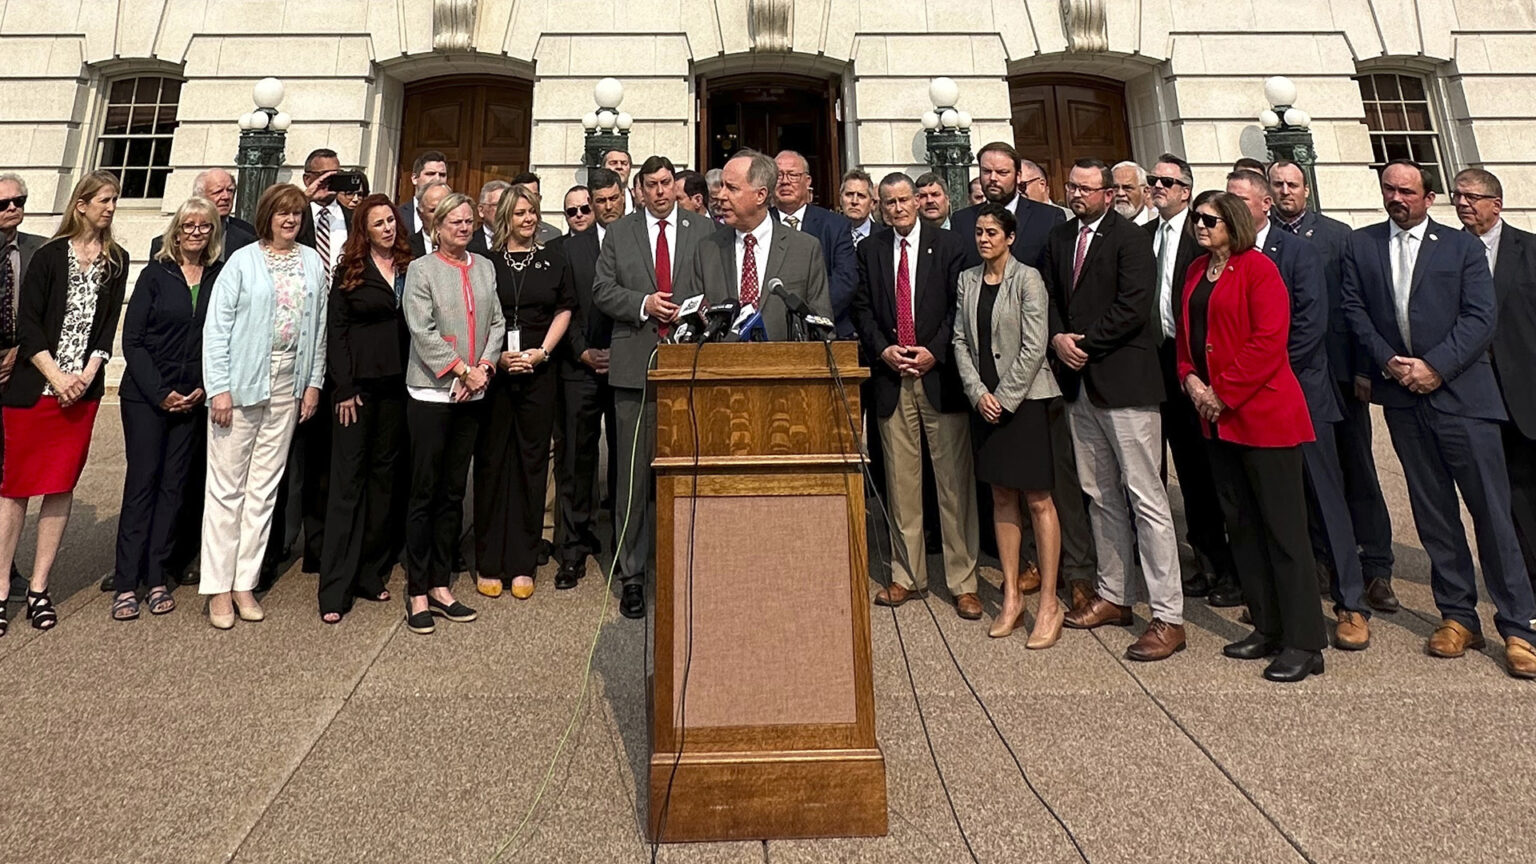 Robin Vos stands behind a wooden podium affixed with multiple microphones with trailing cords, with dozens of people standing behind him on a plaza outside an entrance to the a building with marble masonry and art deco bronze light fixtures.